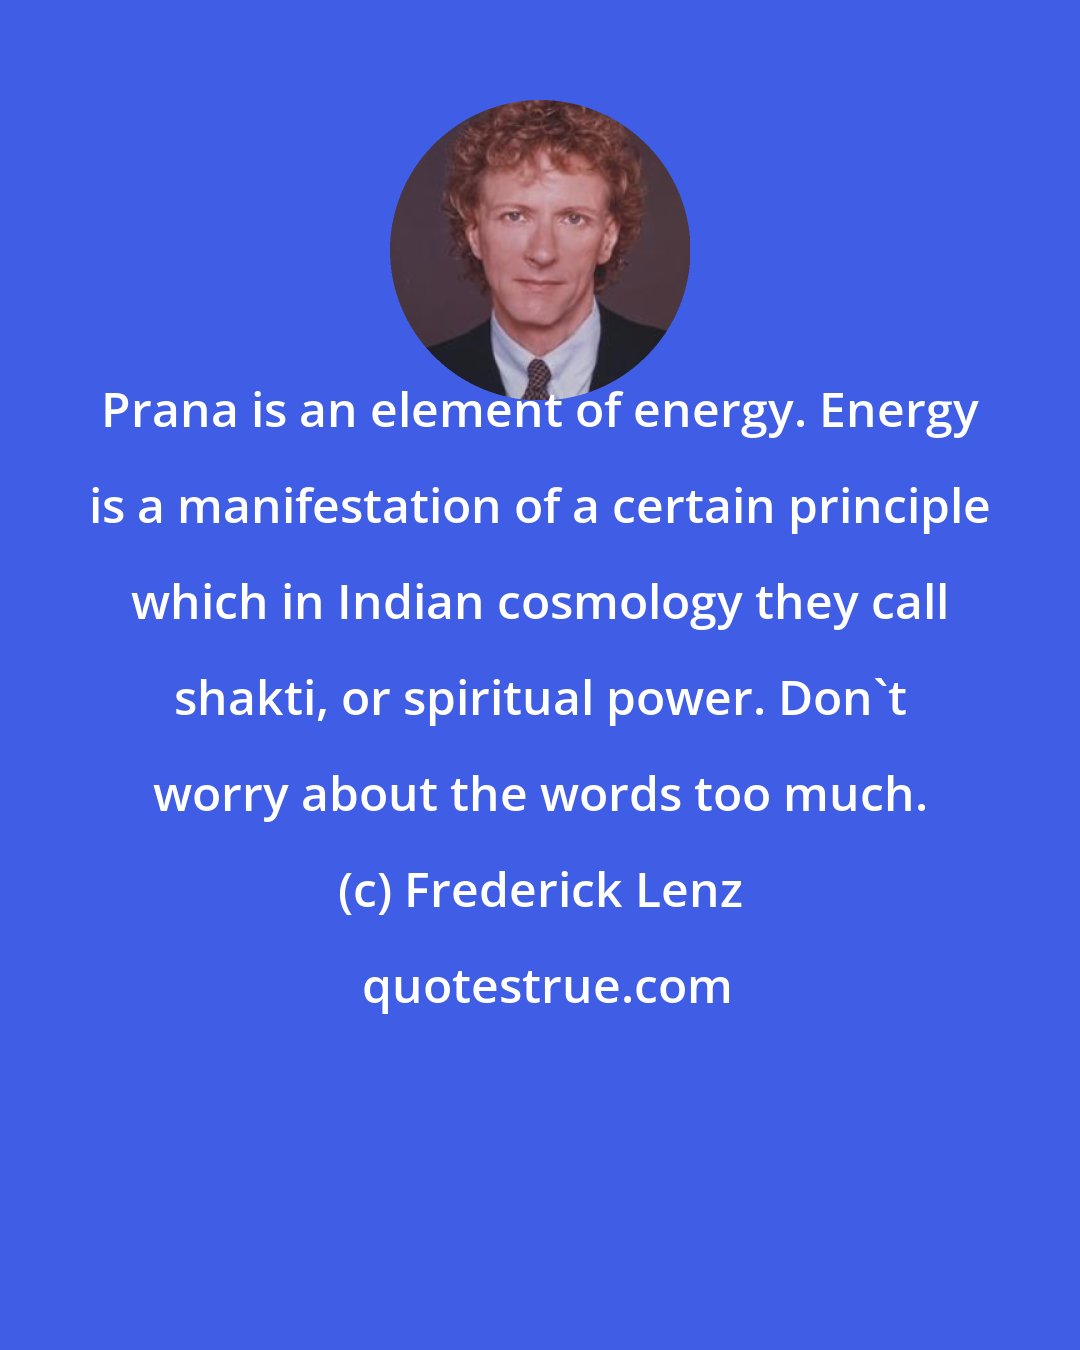 Frederick Lenz: Prana is an element of energy. Energy is a manifestation of a certain principle which in Indian cosmology they call shakti, or spiritual power. Don't worry about the words too much.